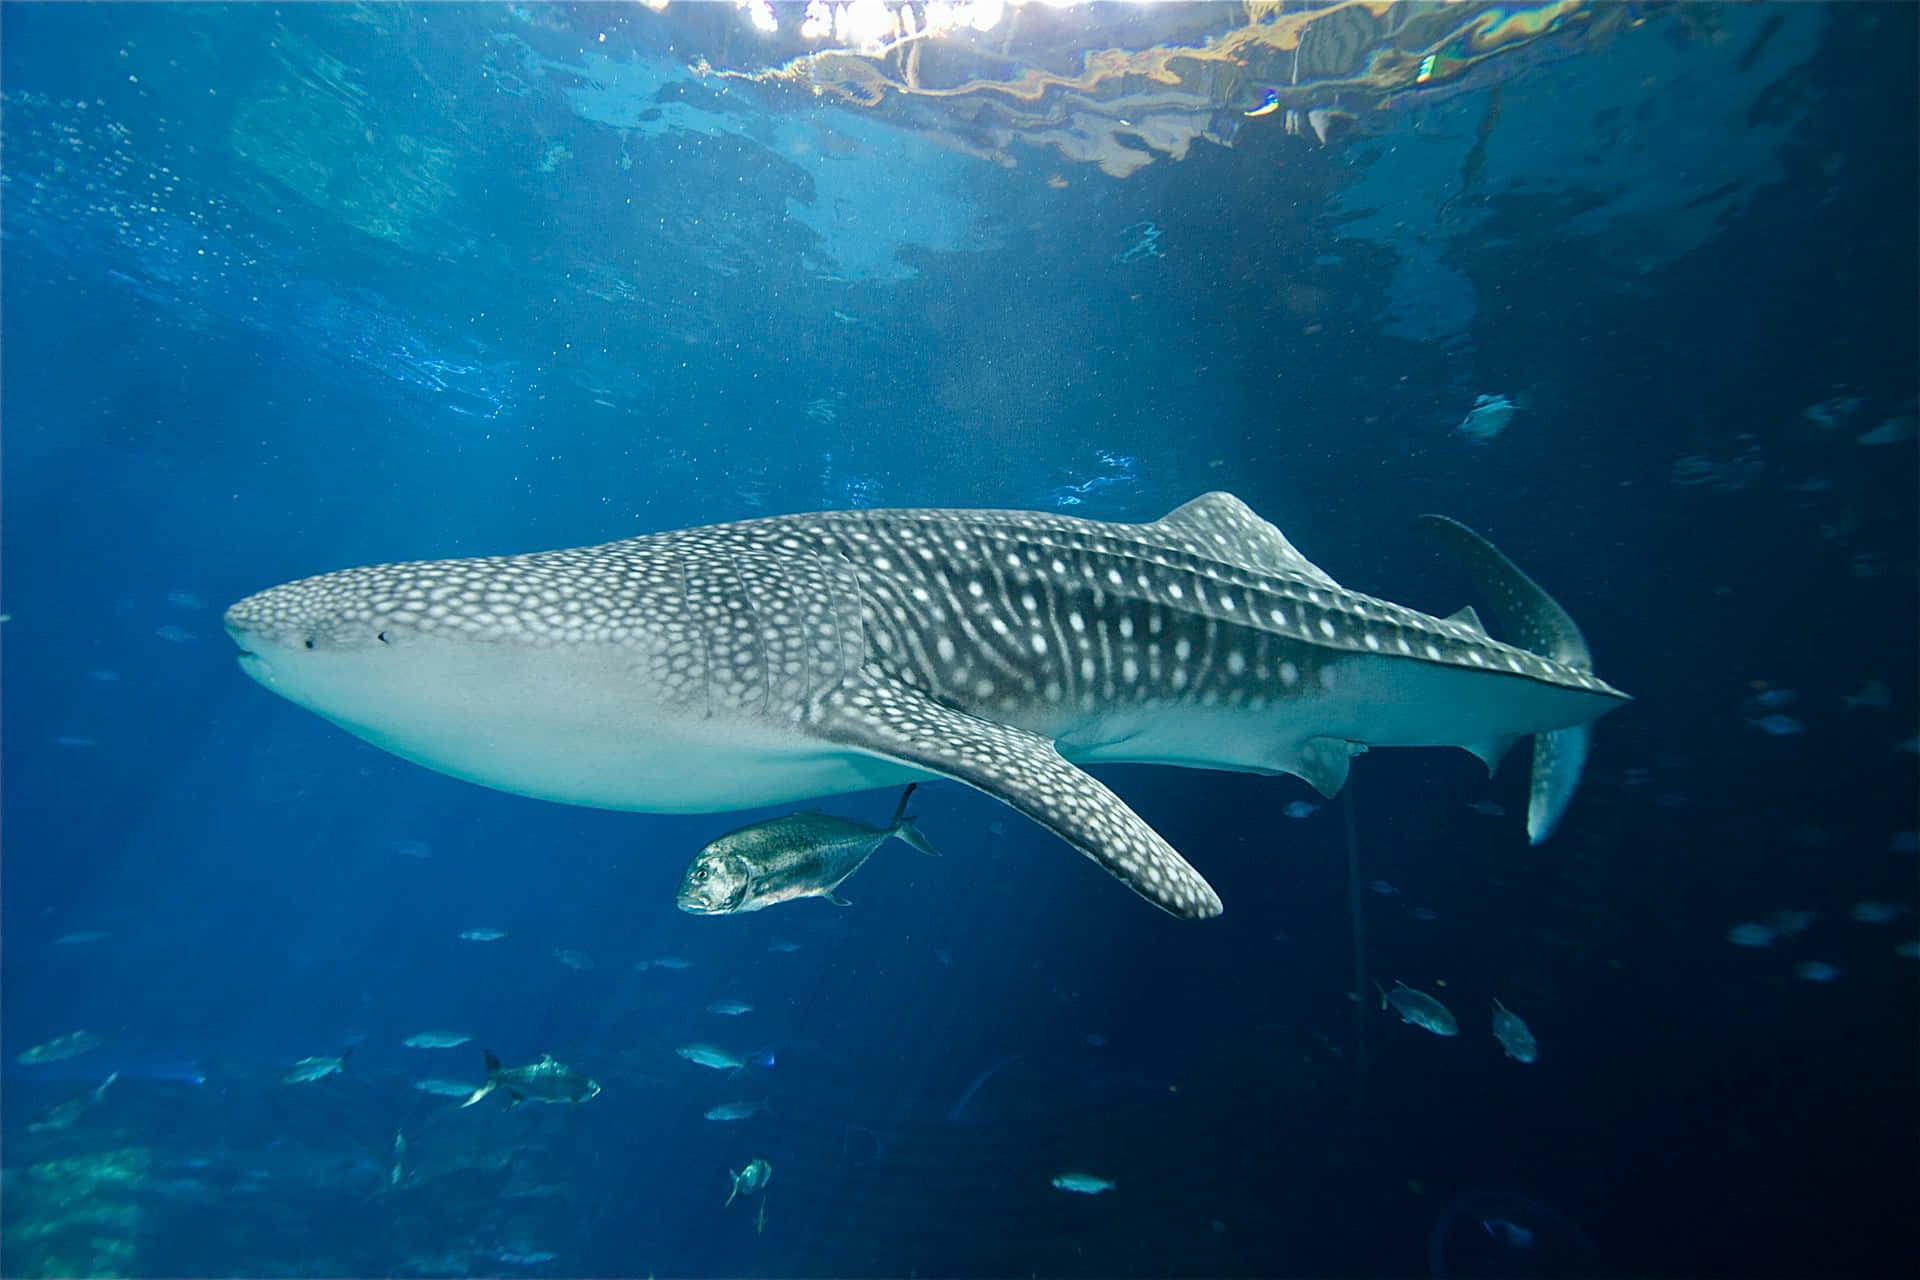 A majestic Whale Shark swimming peacefully in its natural ocean habitat.